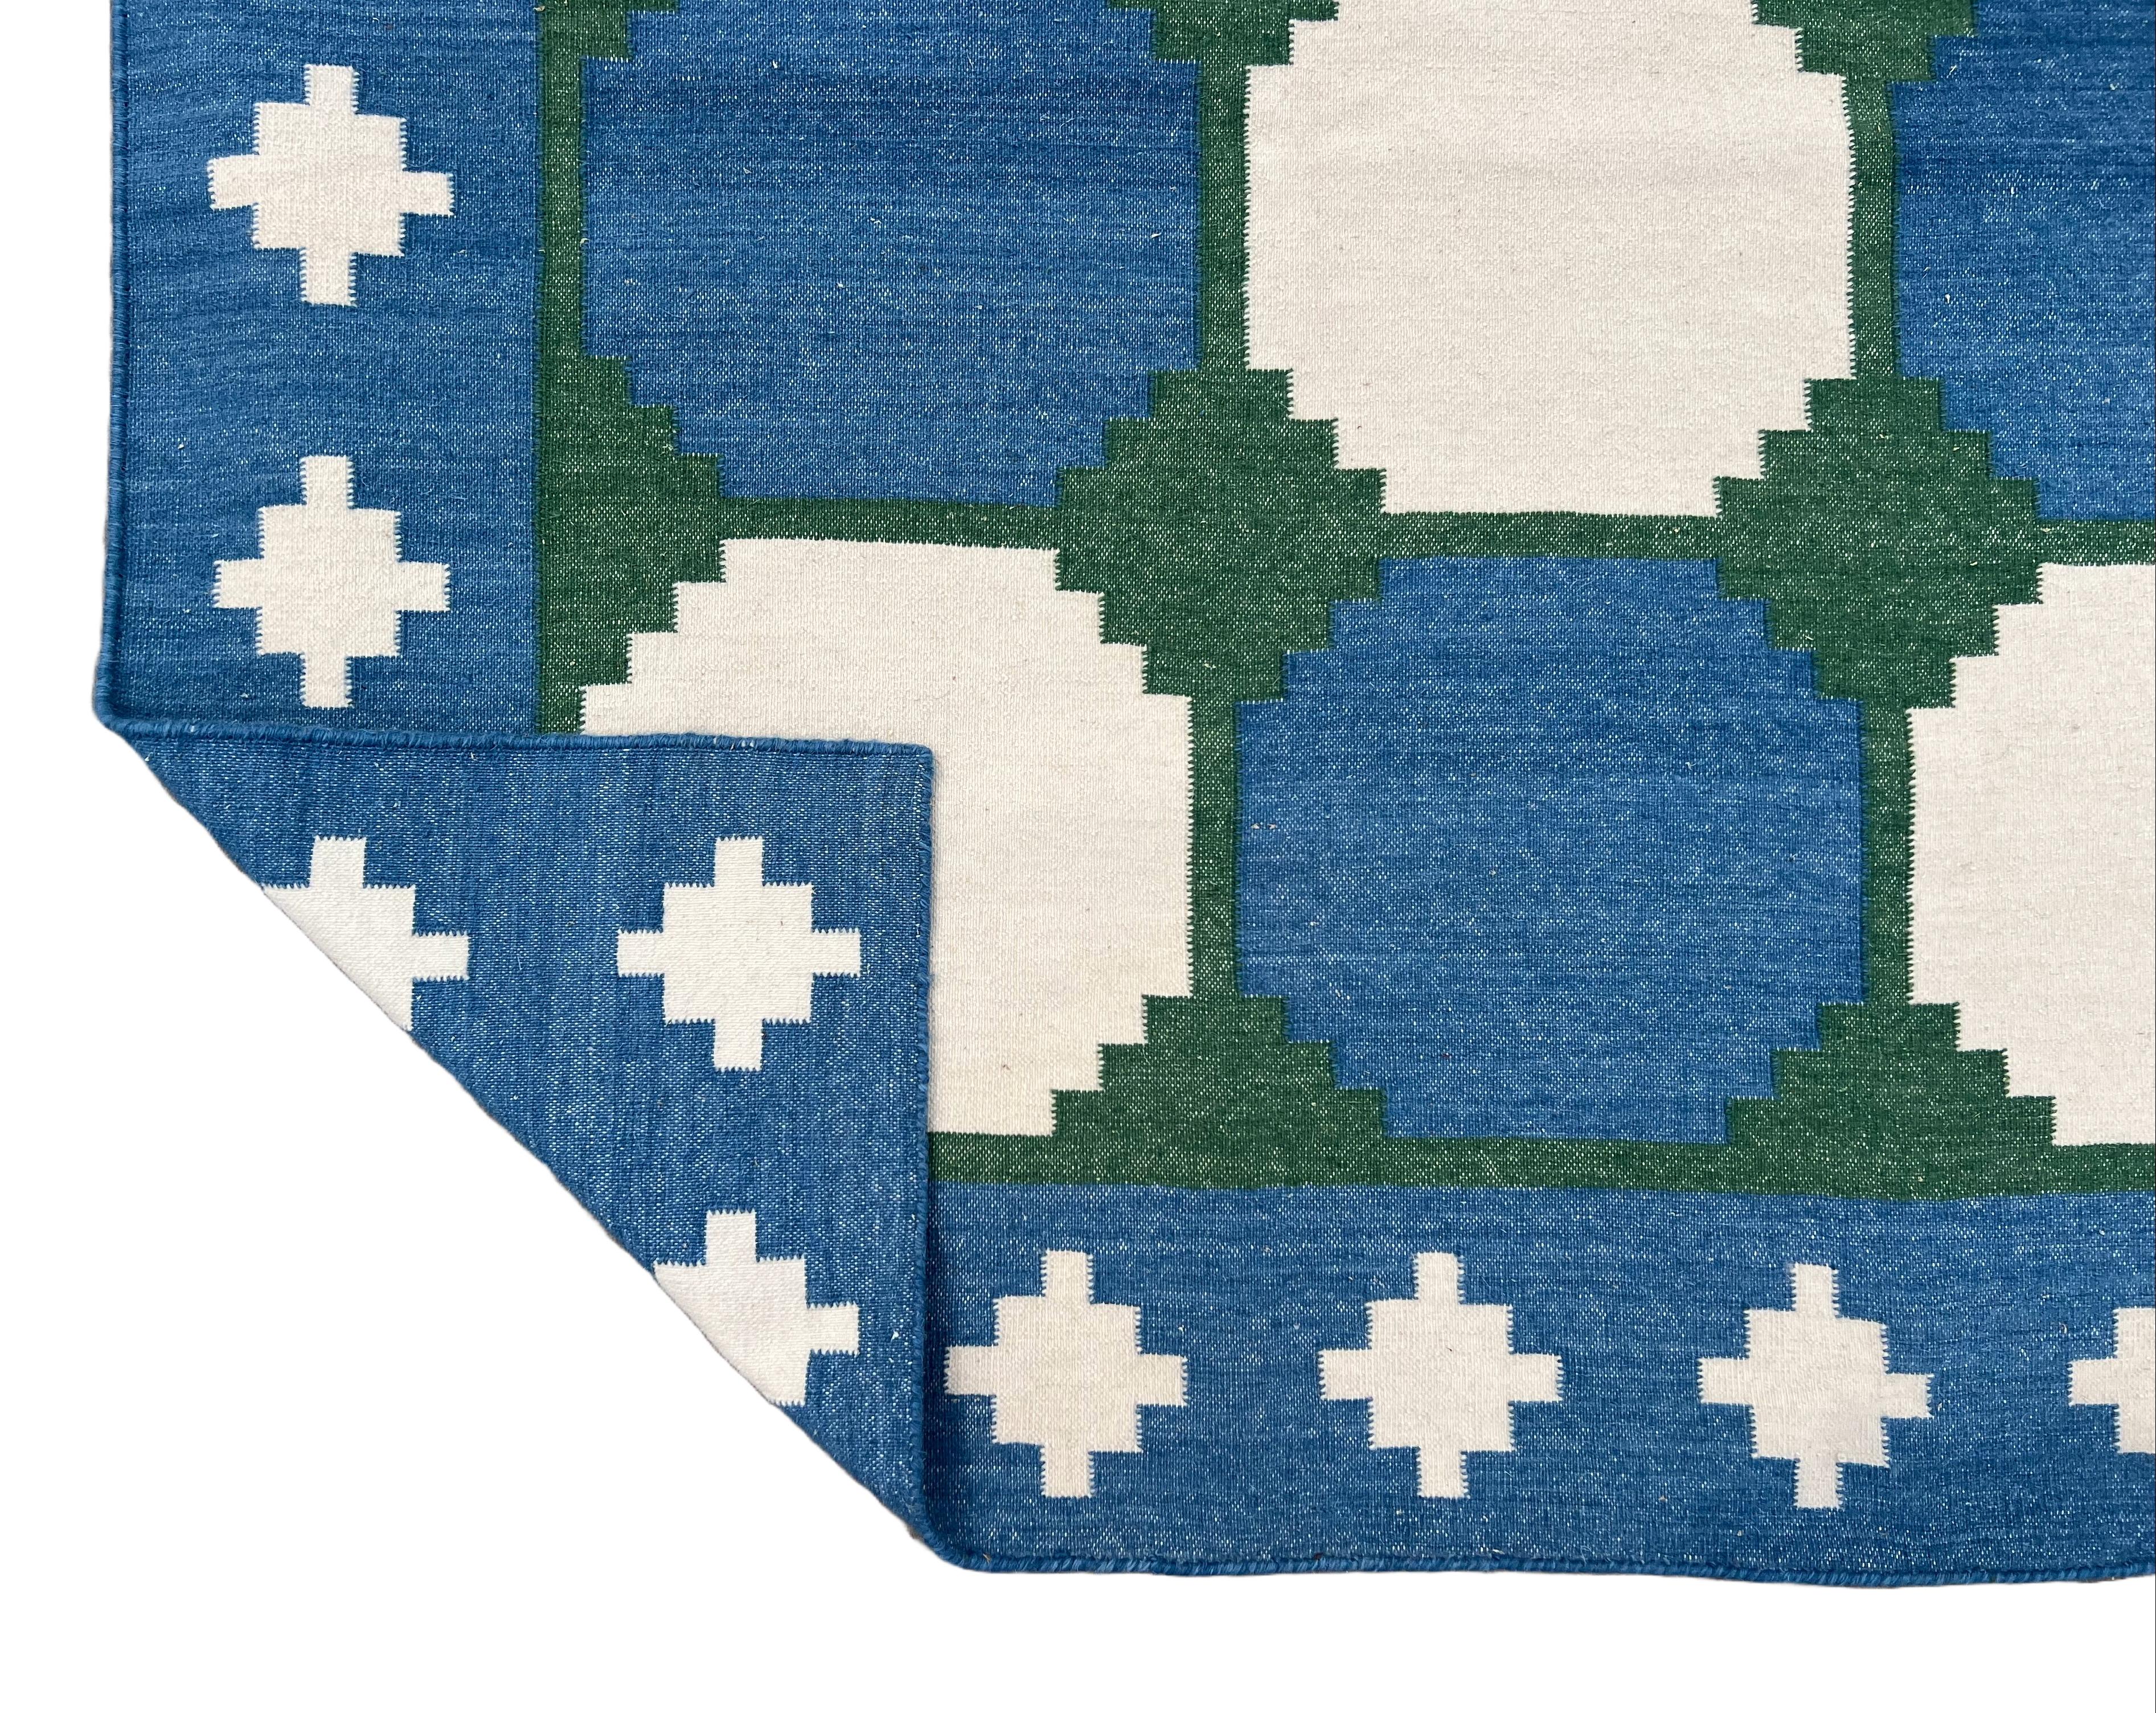 Indian Handmade Woolen Area Flat Weave Rug, 8x10 Blue And Green Tile Patterned Dhurrie For Sale